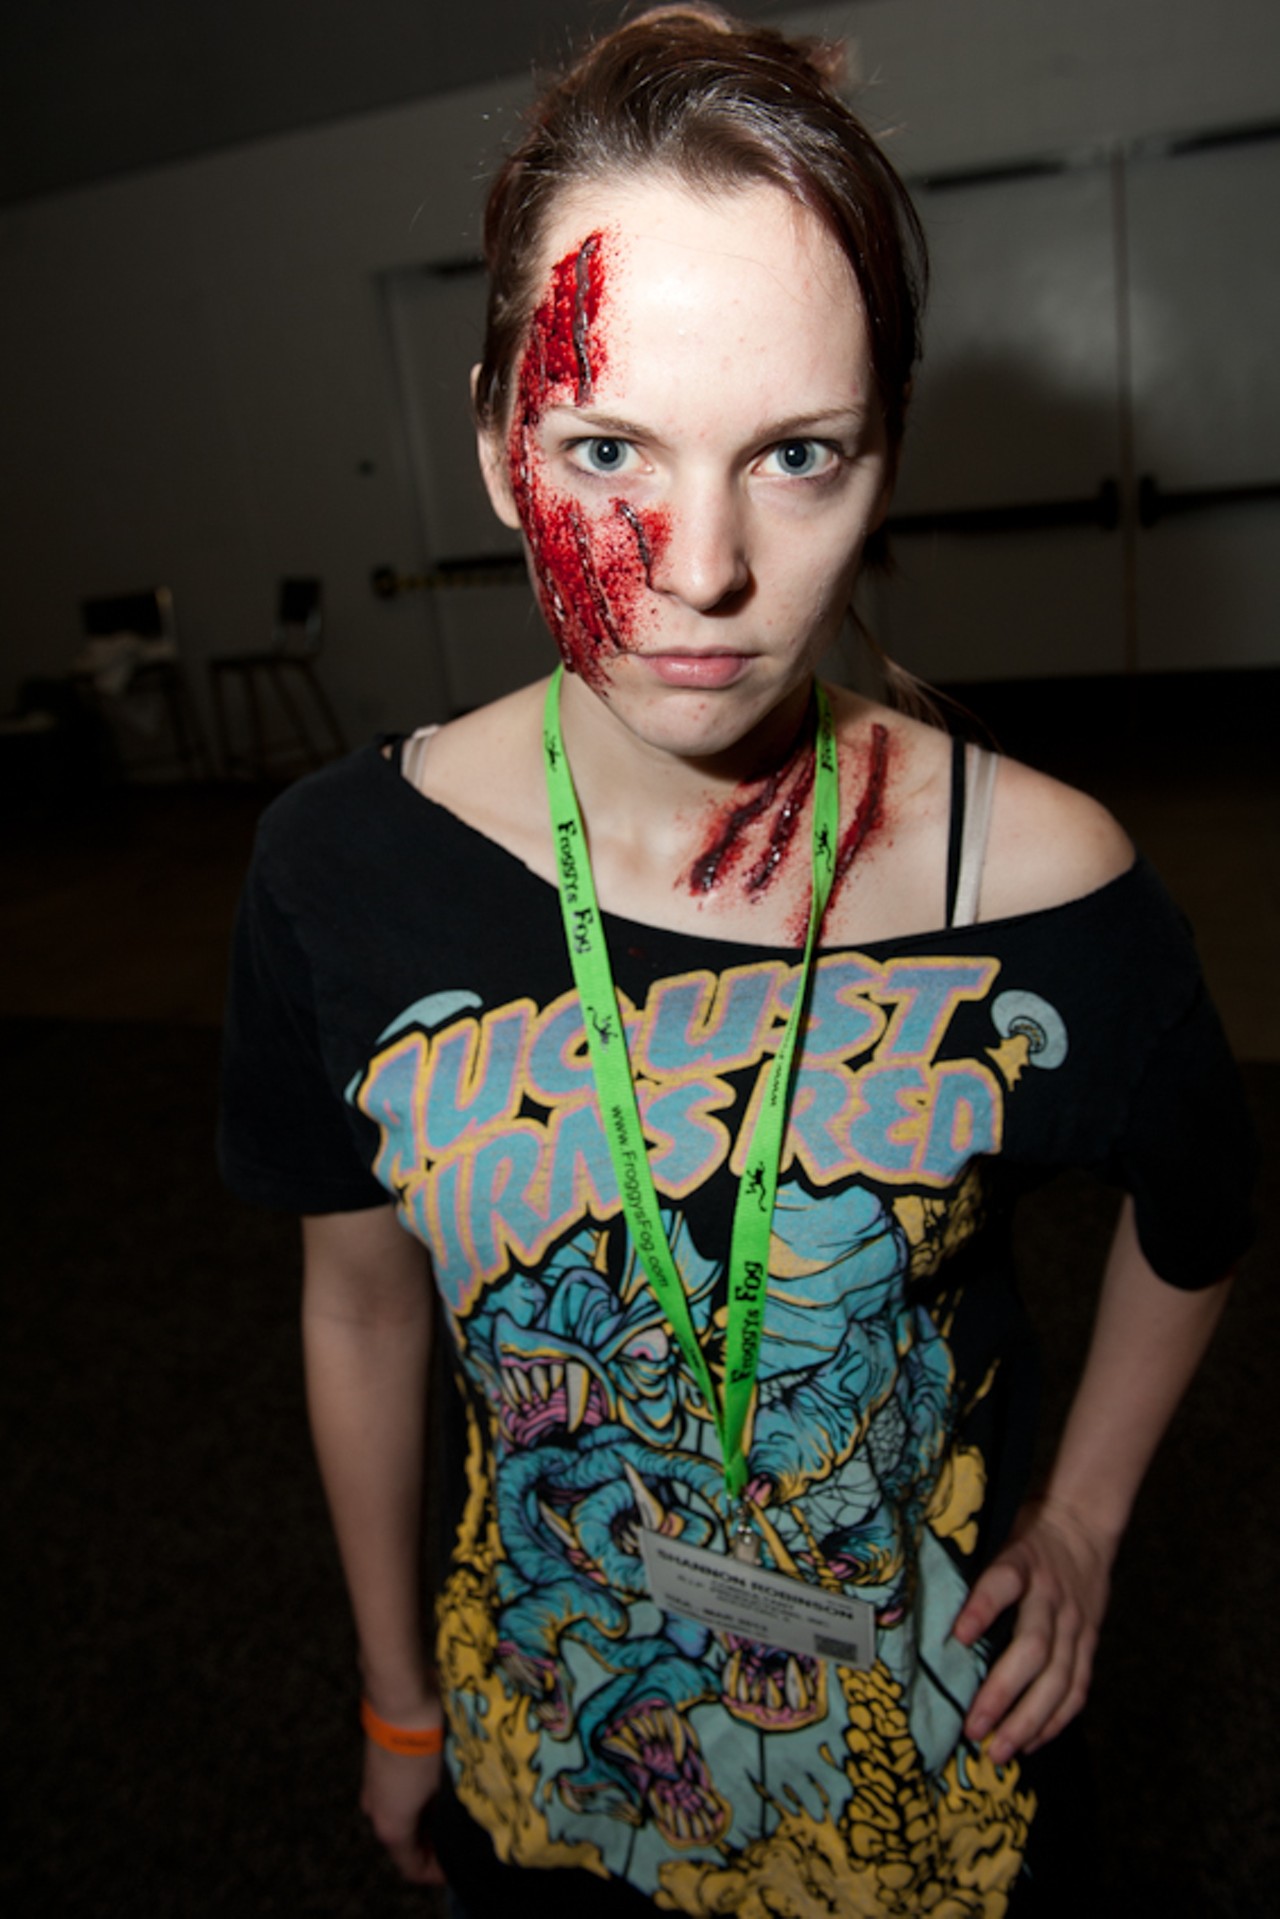 Gory Glory at the TransWorld Haunt Show